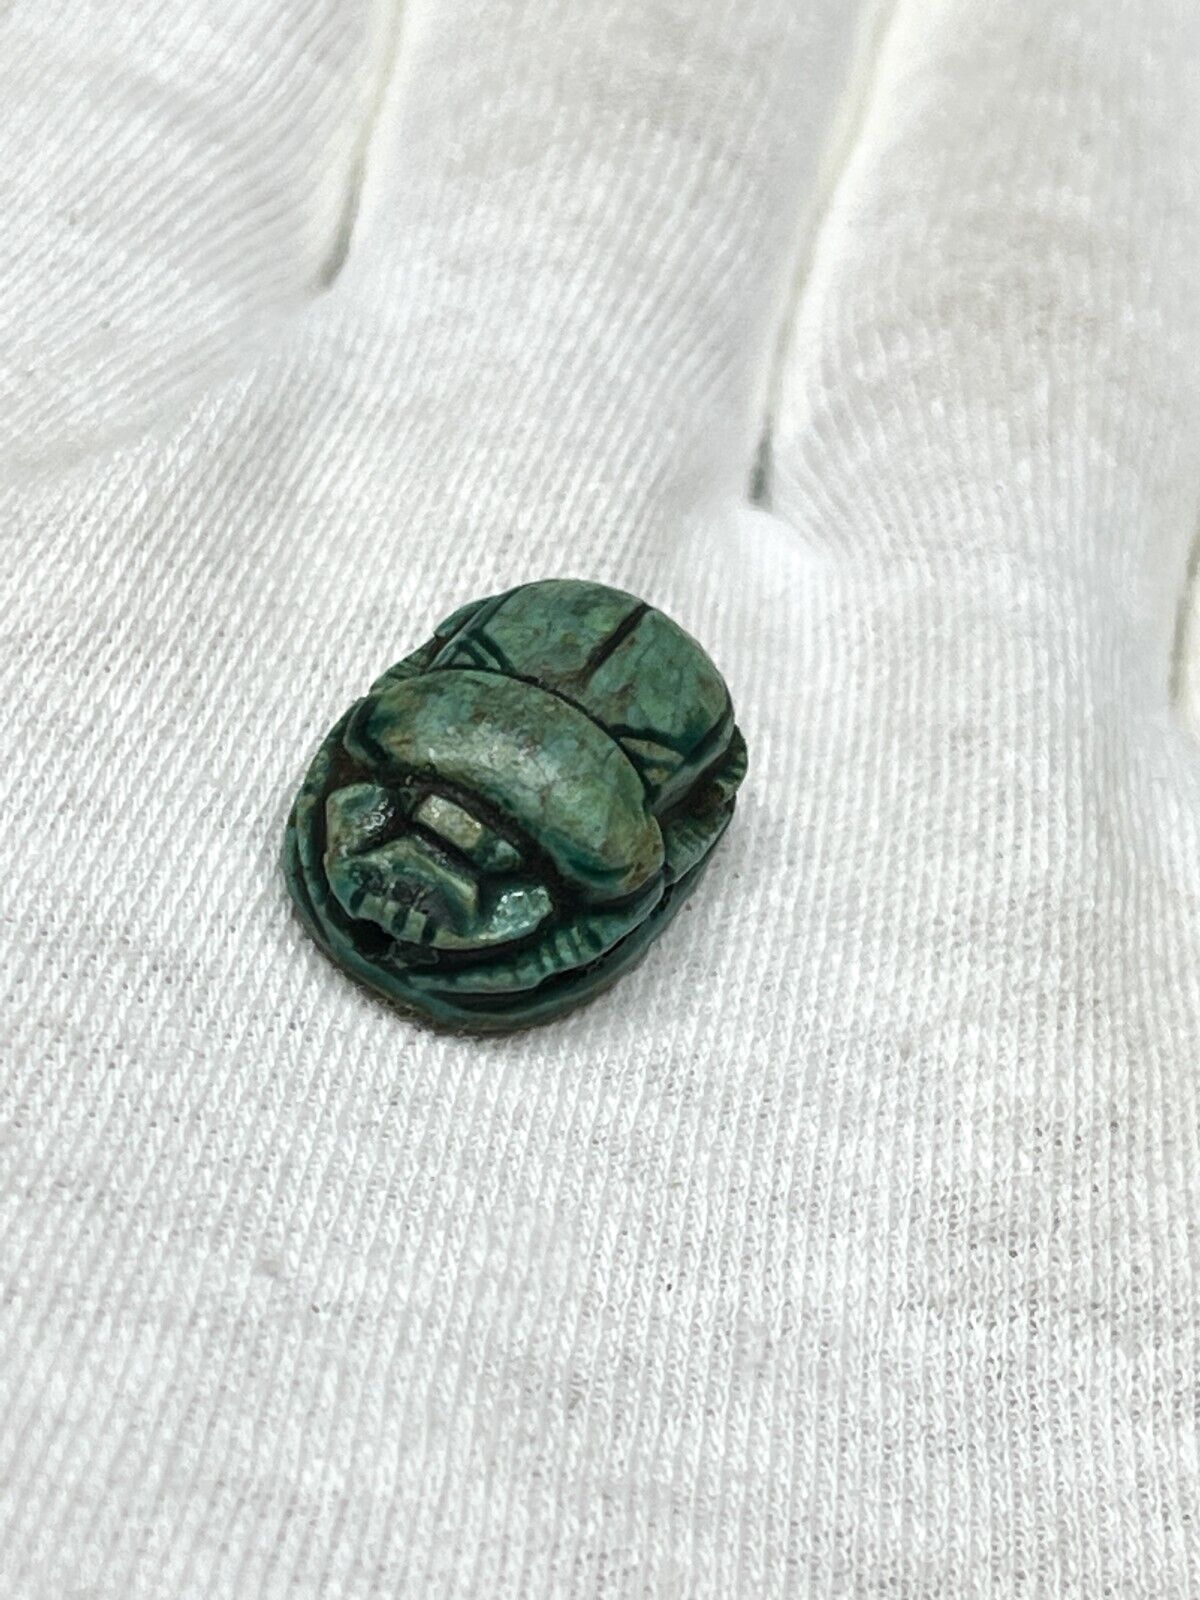 Replica Good luck SCARAB with the Egyptian Details - made with Egyptian soul